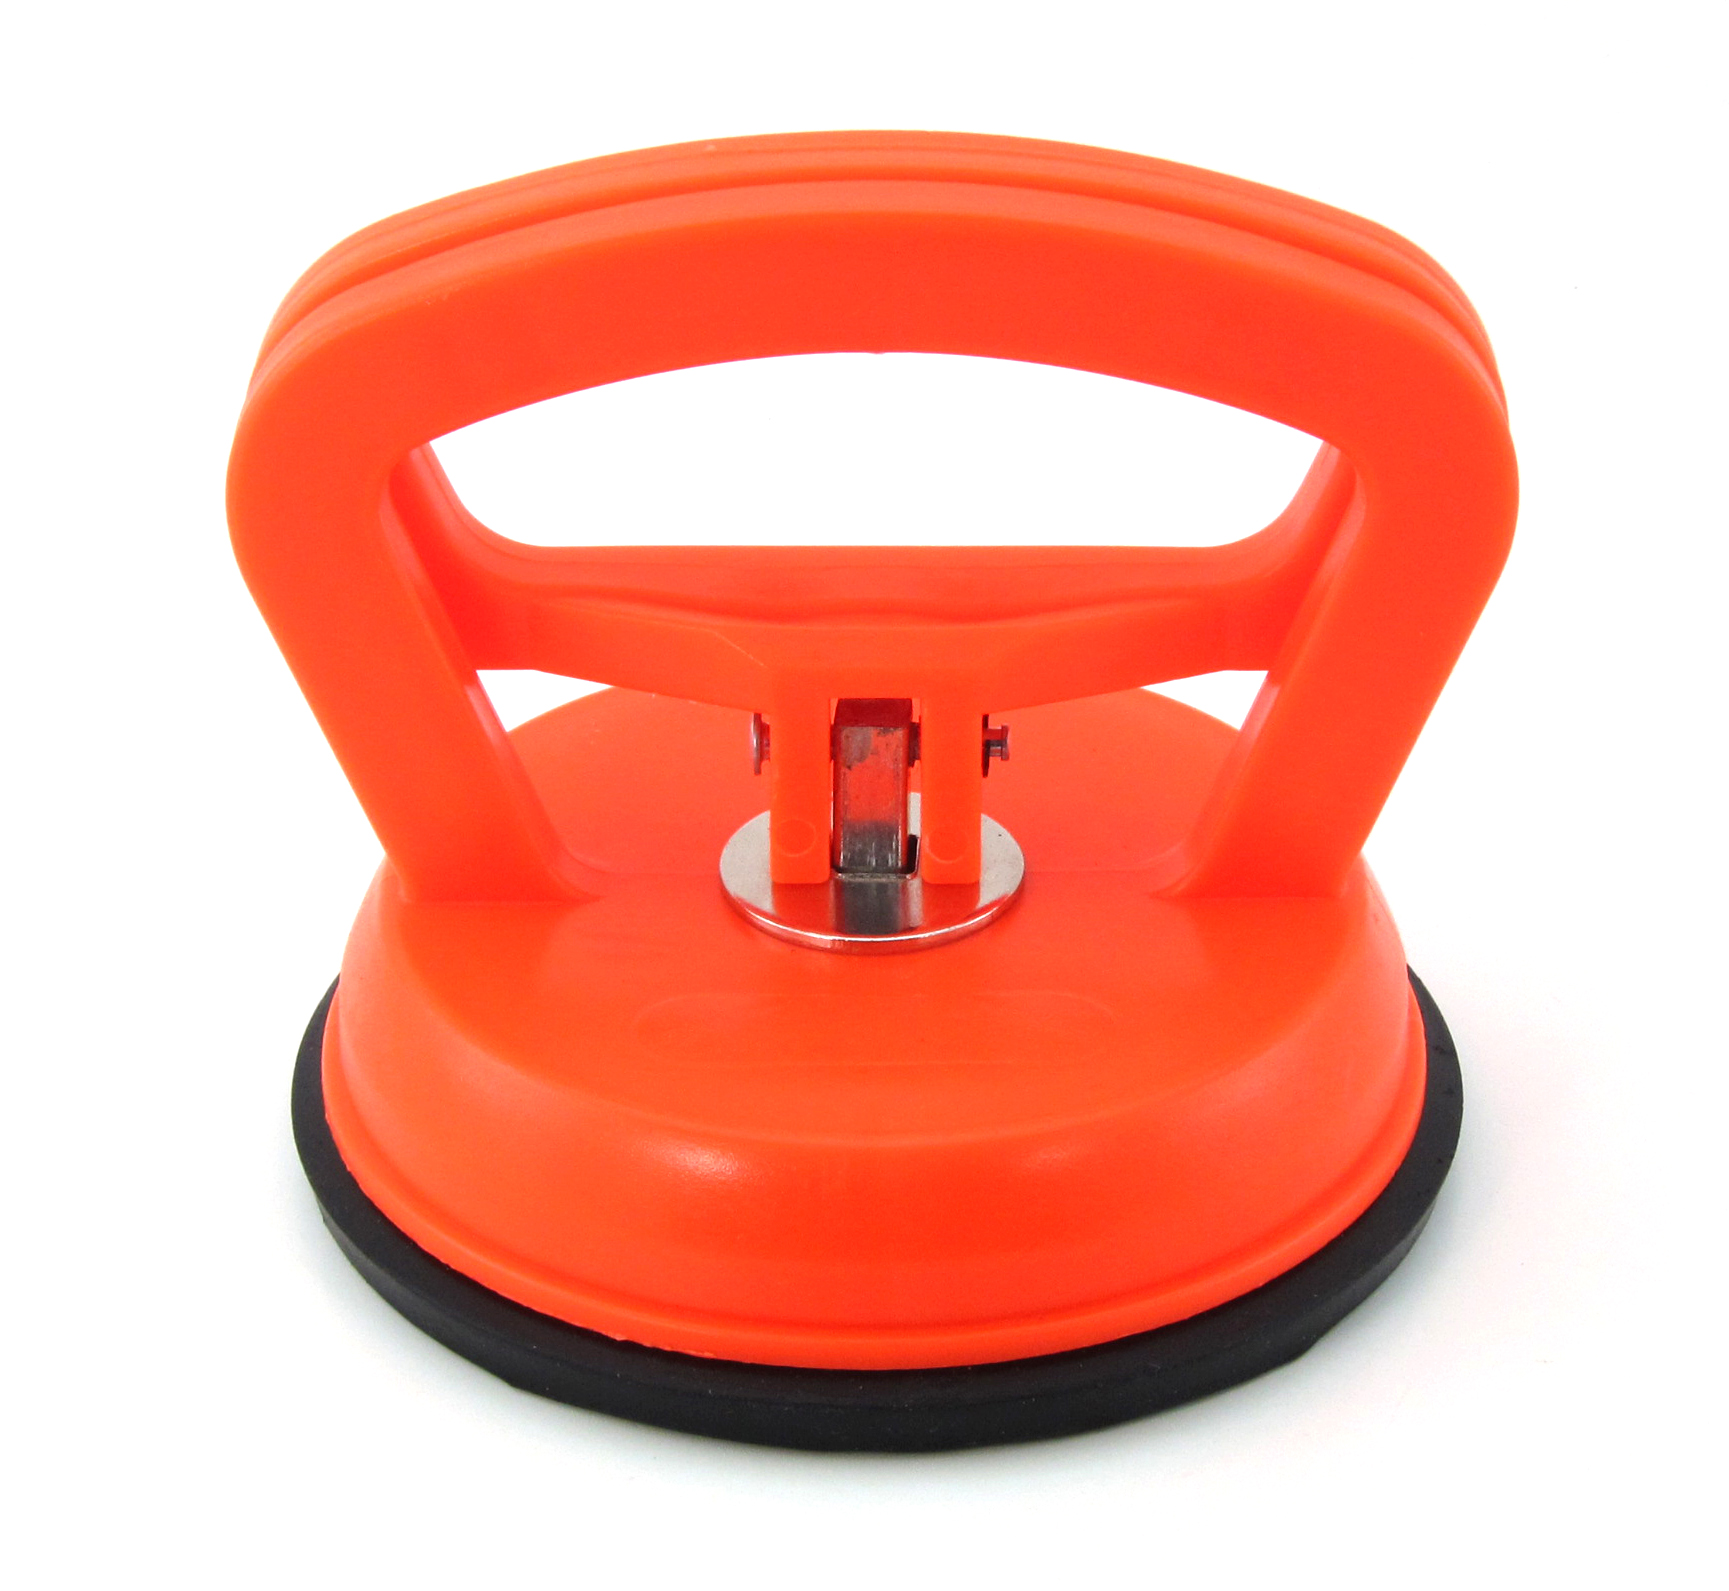 Suction Dent Puller Large Elitexion 4 5 Inches Suction Cup Dent